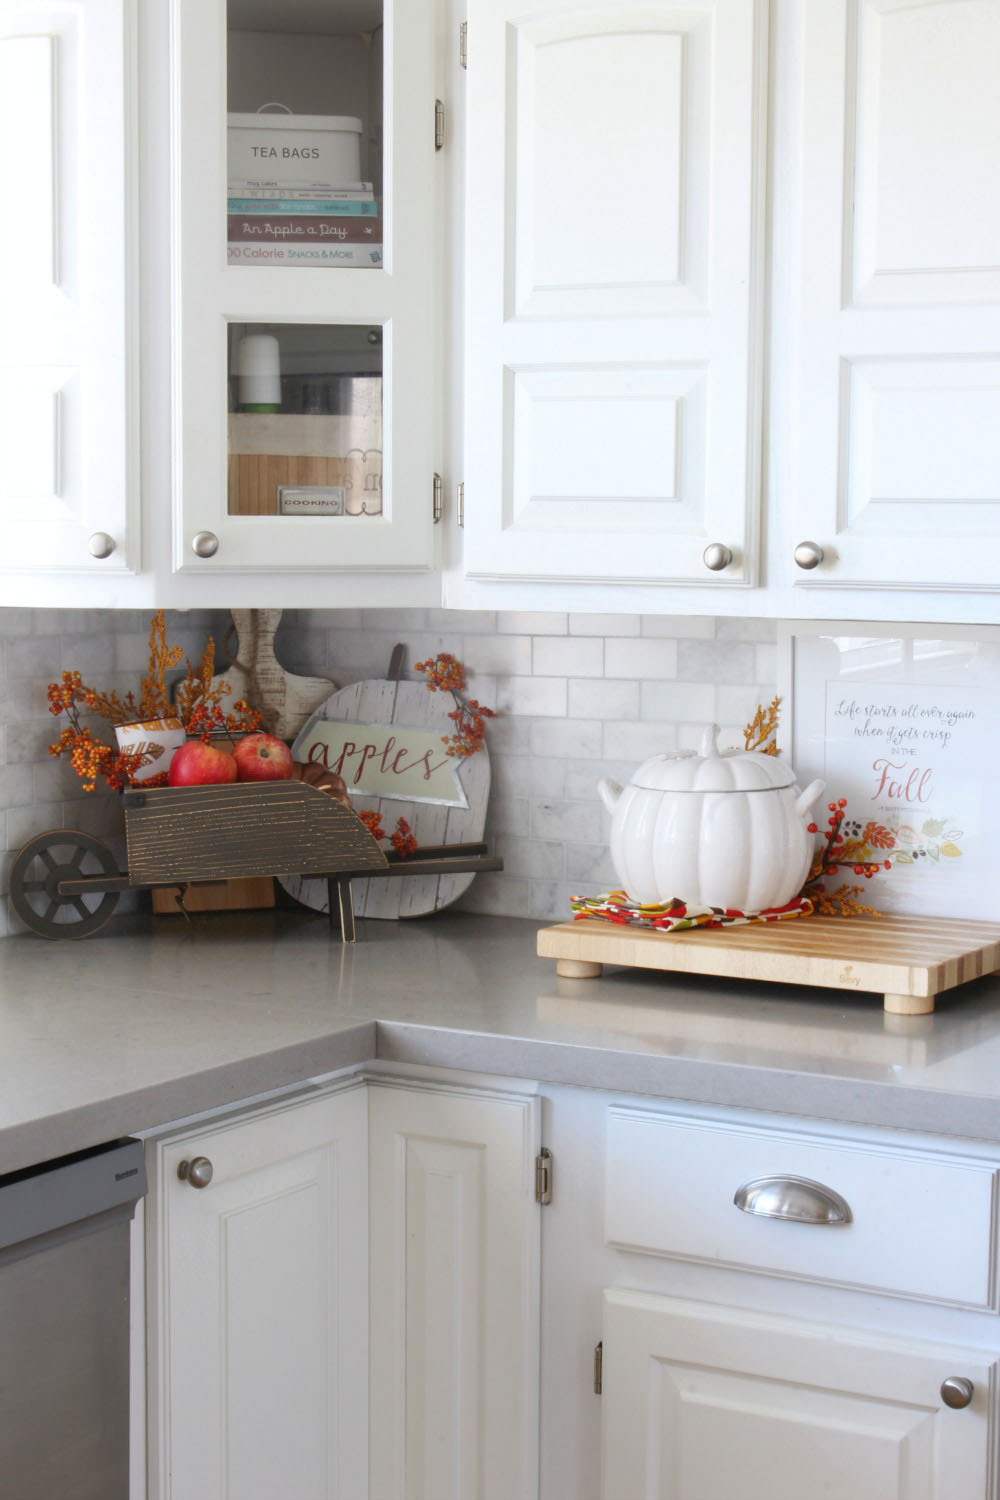 Kitchen fall decor ideas. Join in this fall home tour for tons of fall decor inspiration!